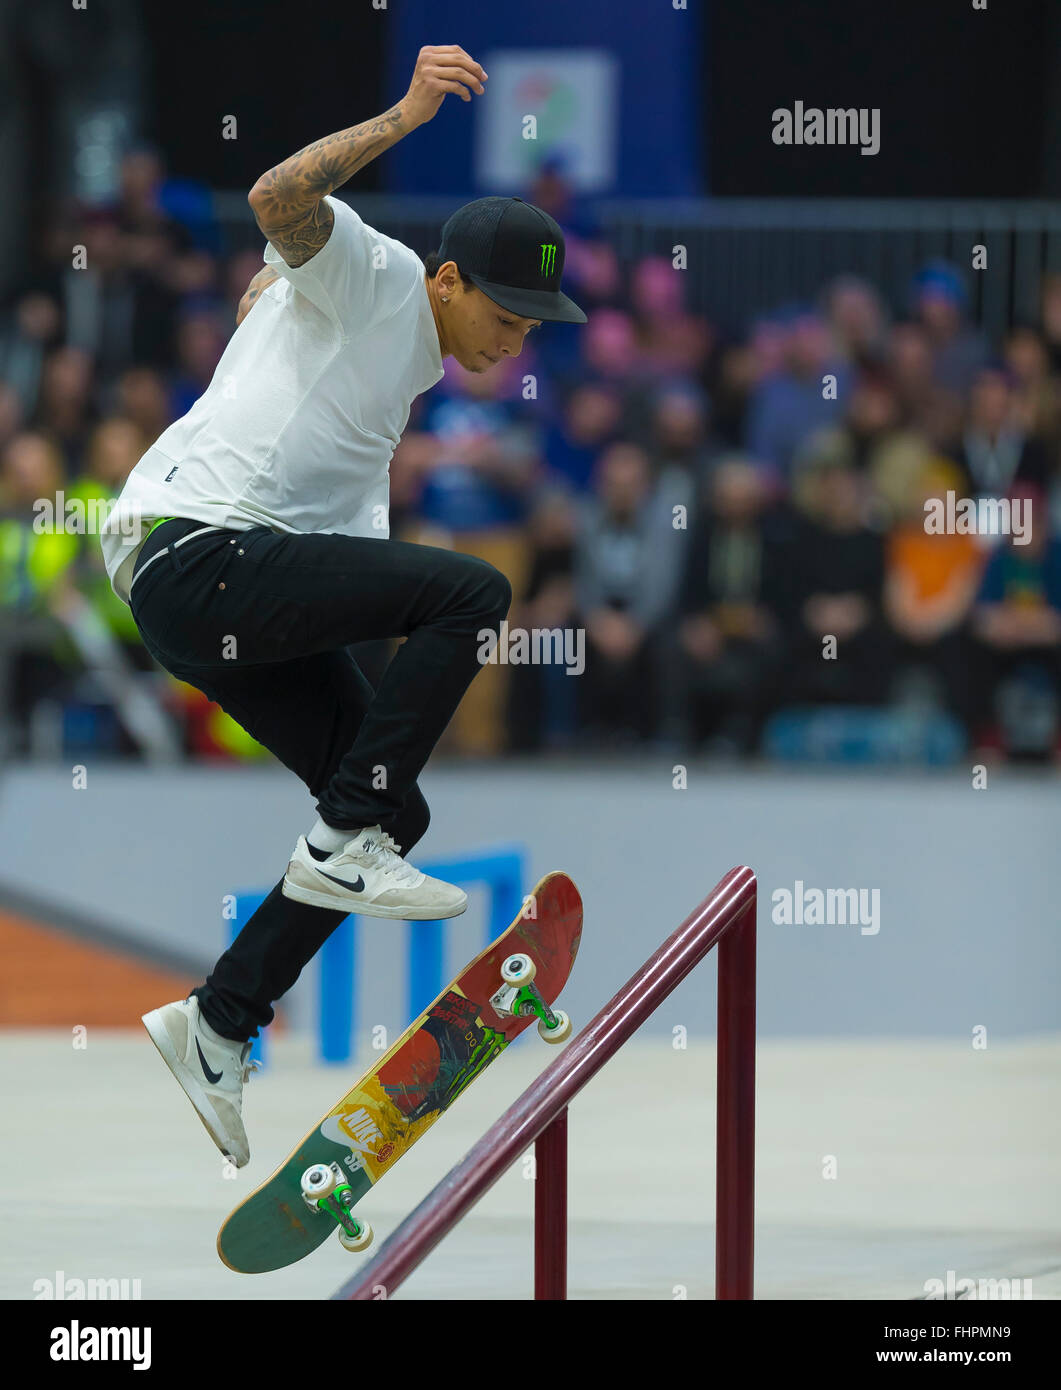 Oslo, Norway. 25th February, 2016. 25.02.2016. Warehouse 13 Oslo, Norway. X  Games Oslo 2016. Mens Skateboard final. Nyjah Huston of United States  competes in the men's skateboard street final during the X